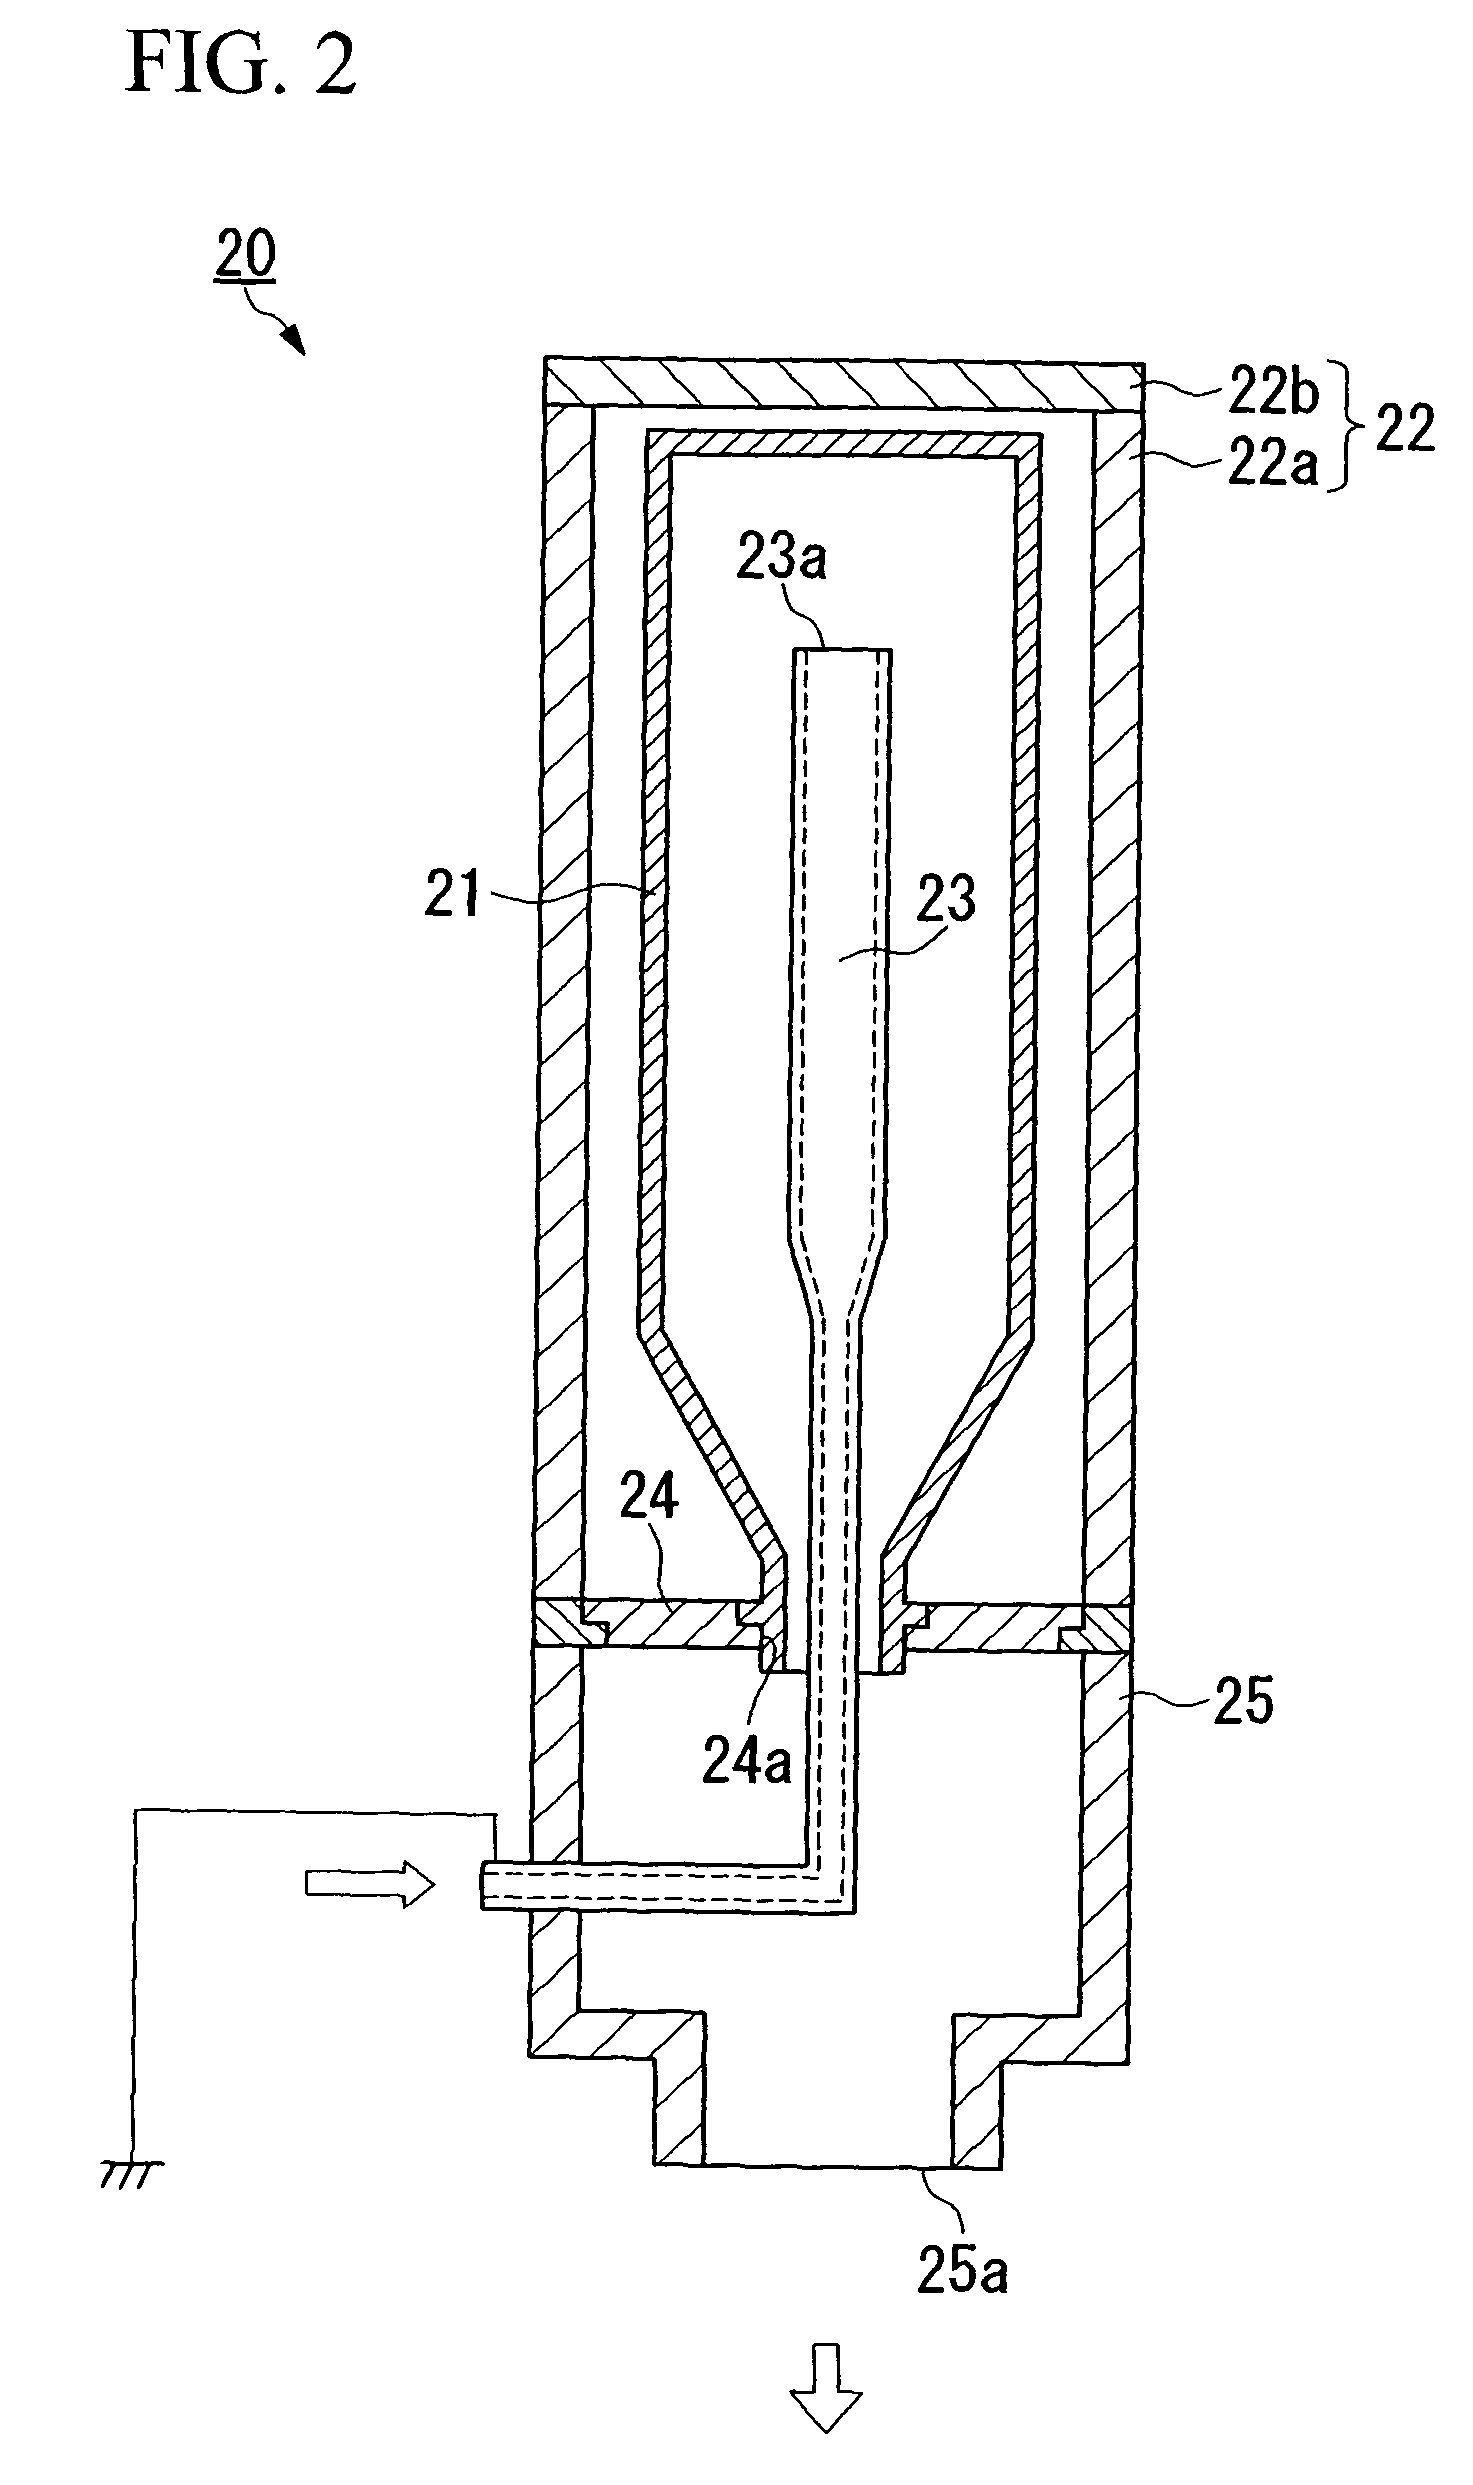 Method for forming thin film, apparatus for forming thin film, and method for monitoring thin film forming process